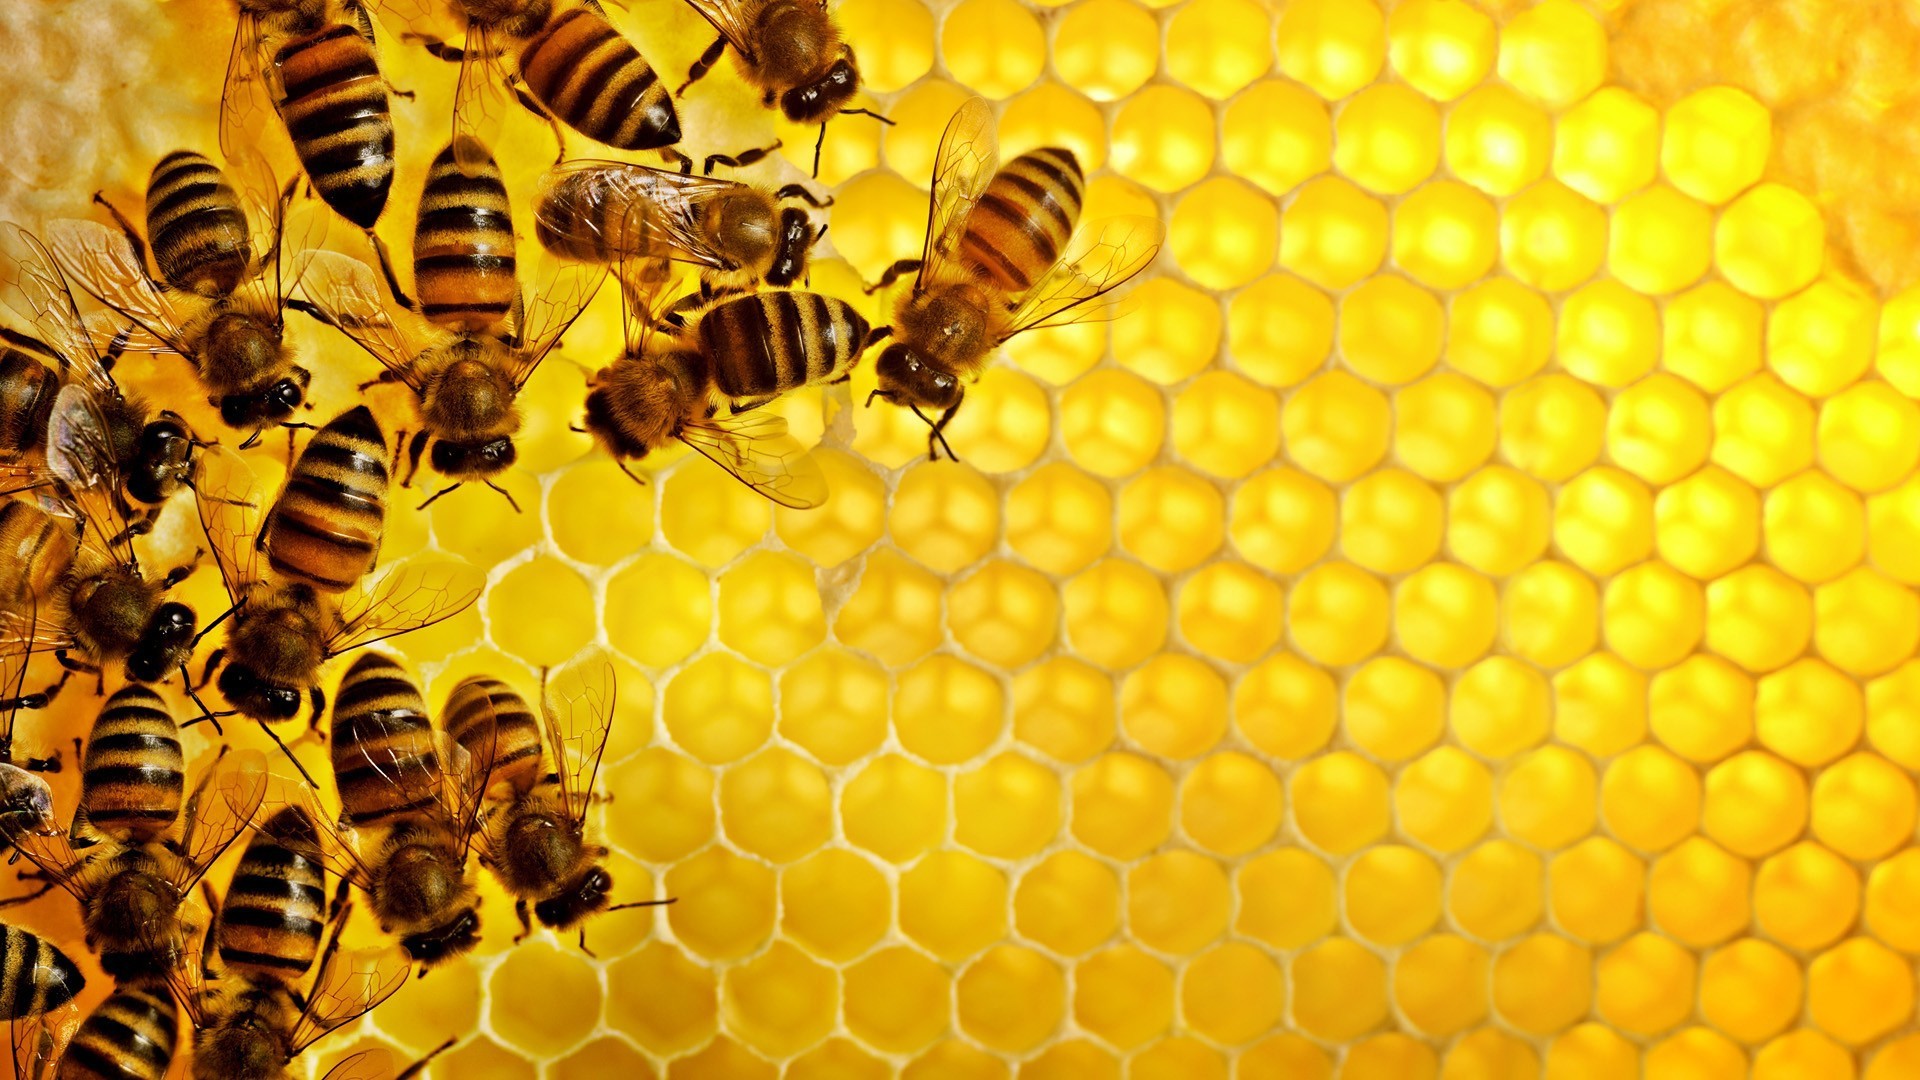 pattern, Texture, Geometry, Hexagon, Nature, Insect, Bees, Honey, Yellow, Hive Wallpaper